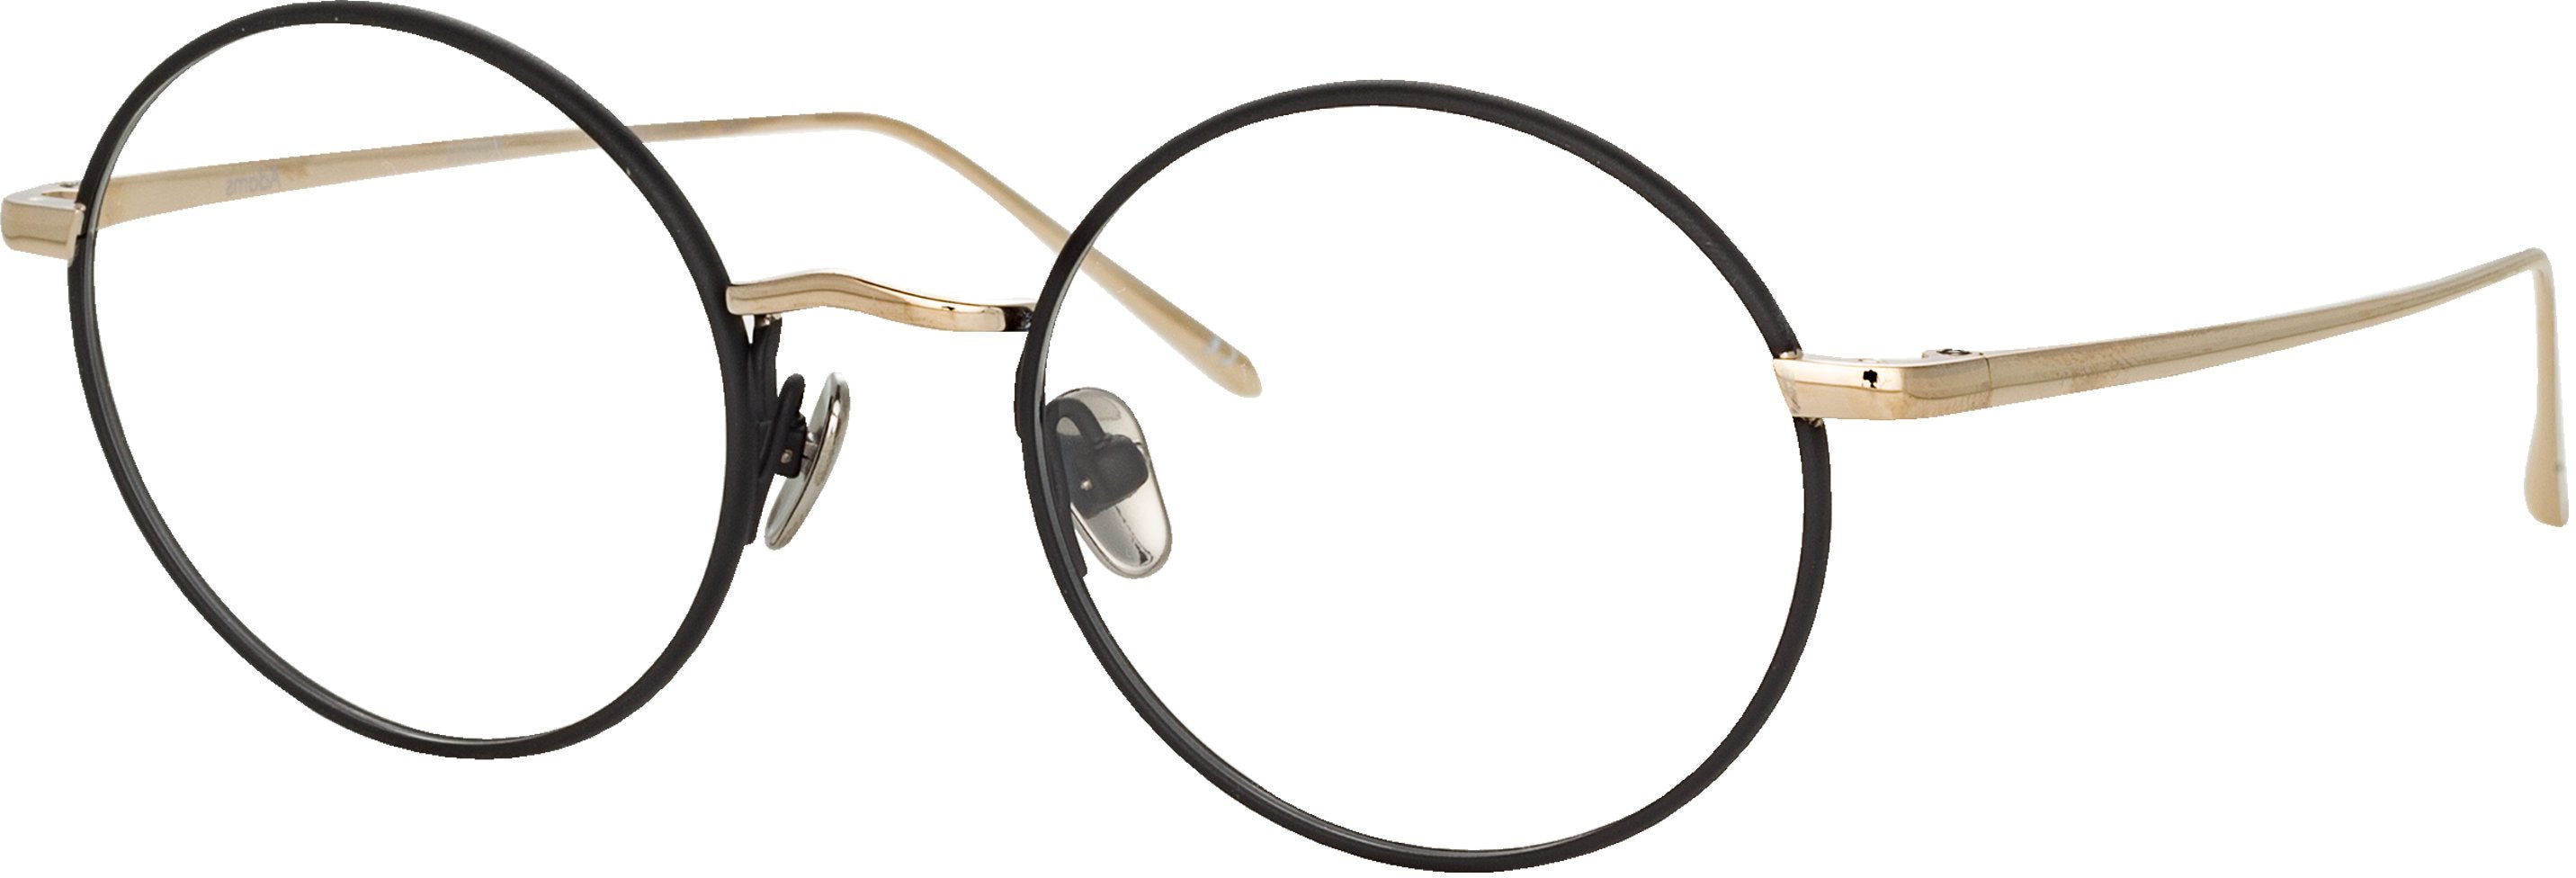 Color_LFL925C3OPT - Adams Oval Optical Frame in Black and Light Gold